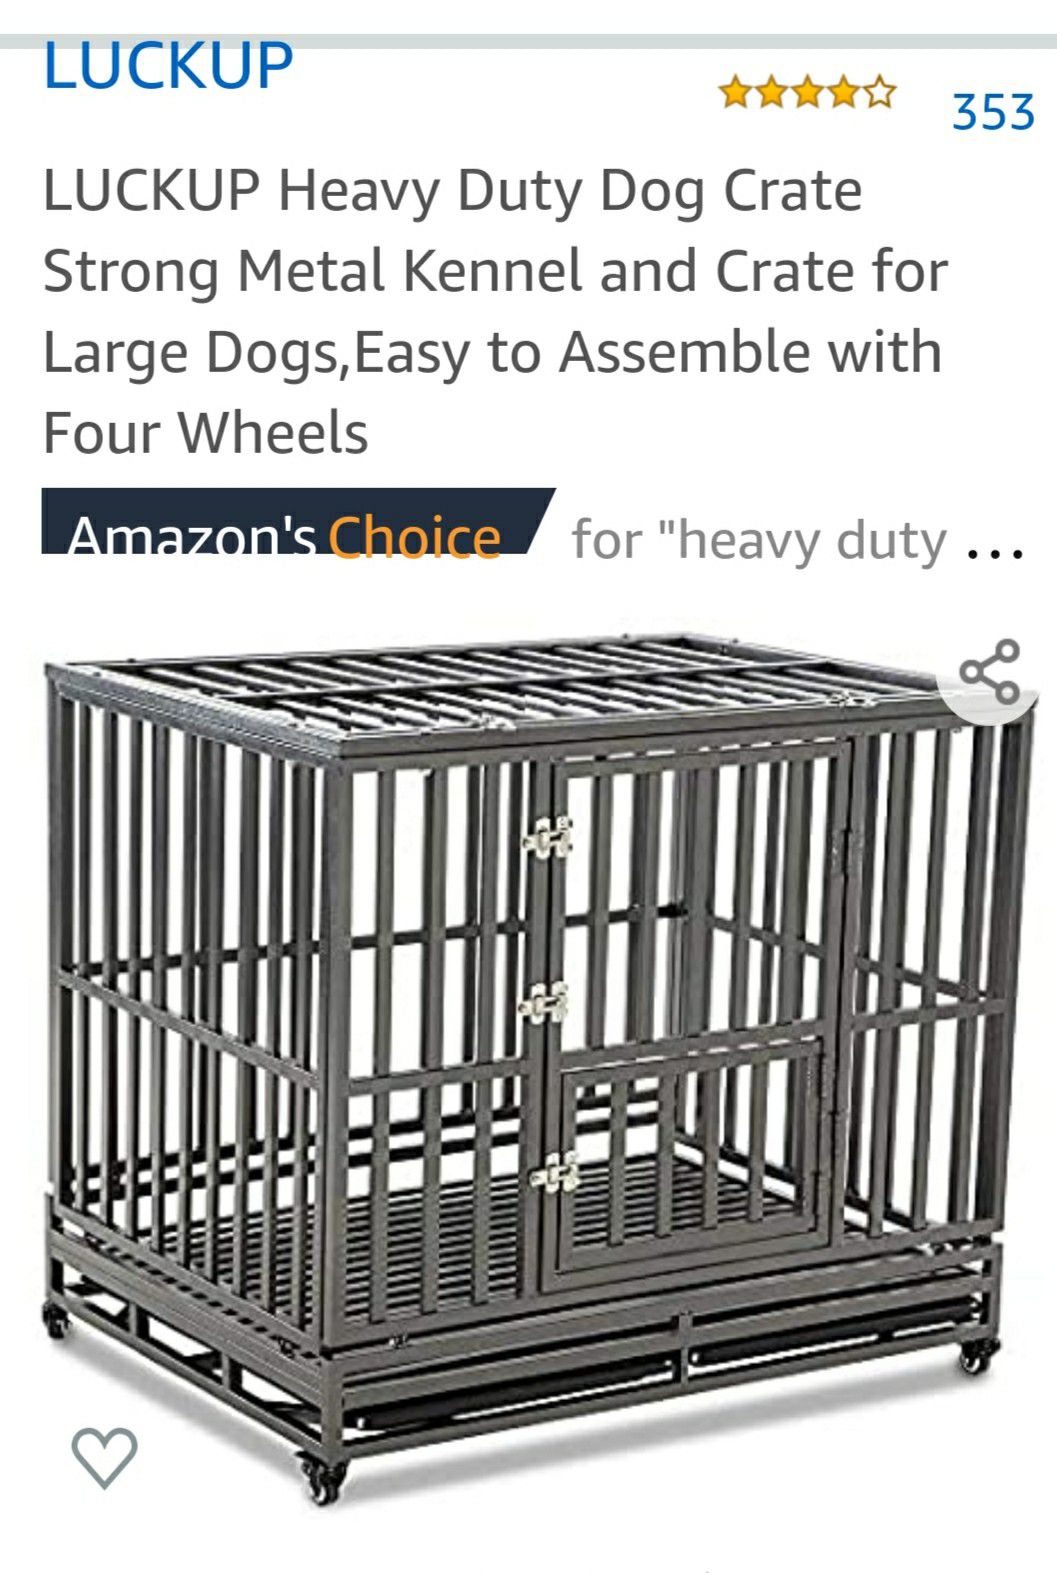 LUCKUP Heavy Duty Dog Crate